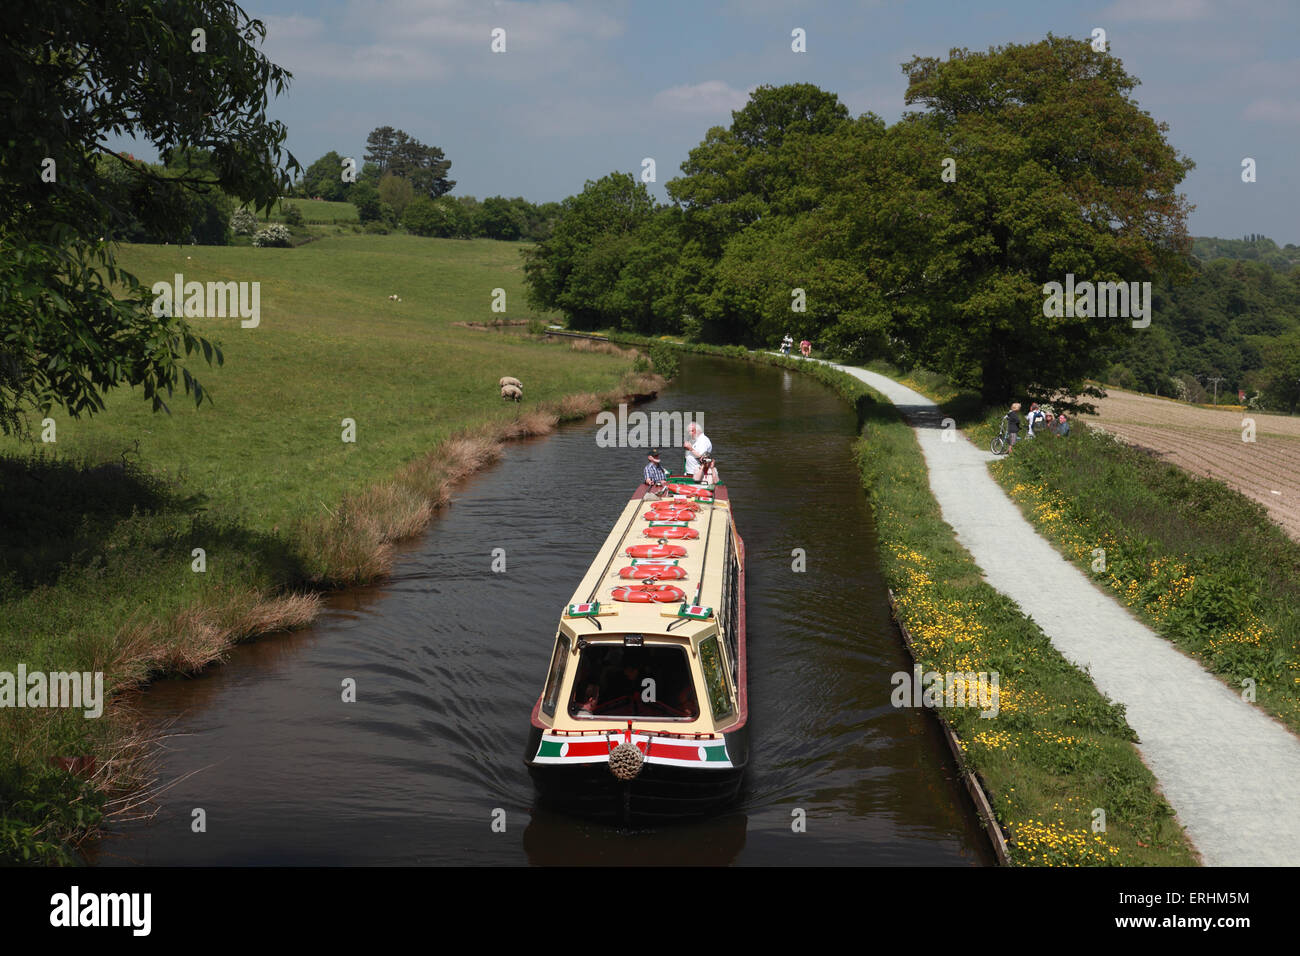 The trip boat, Thomas Telford, based at Llangollen Wharf travelling on the Llangollen canal by Millars Bridge Stock Photo